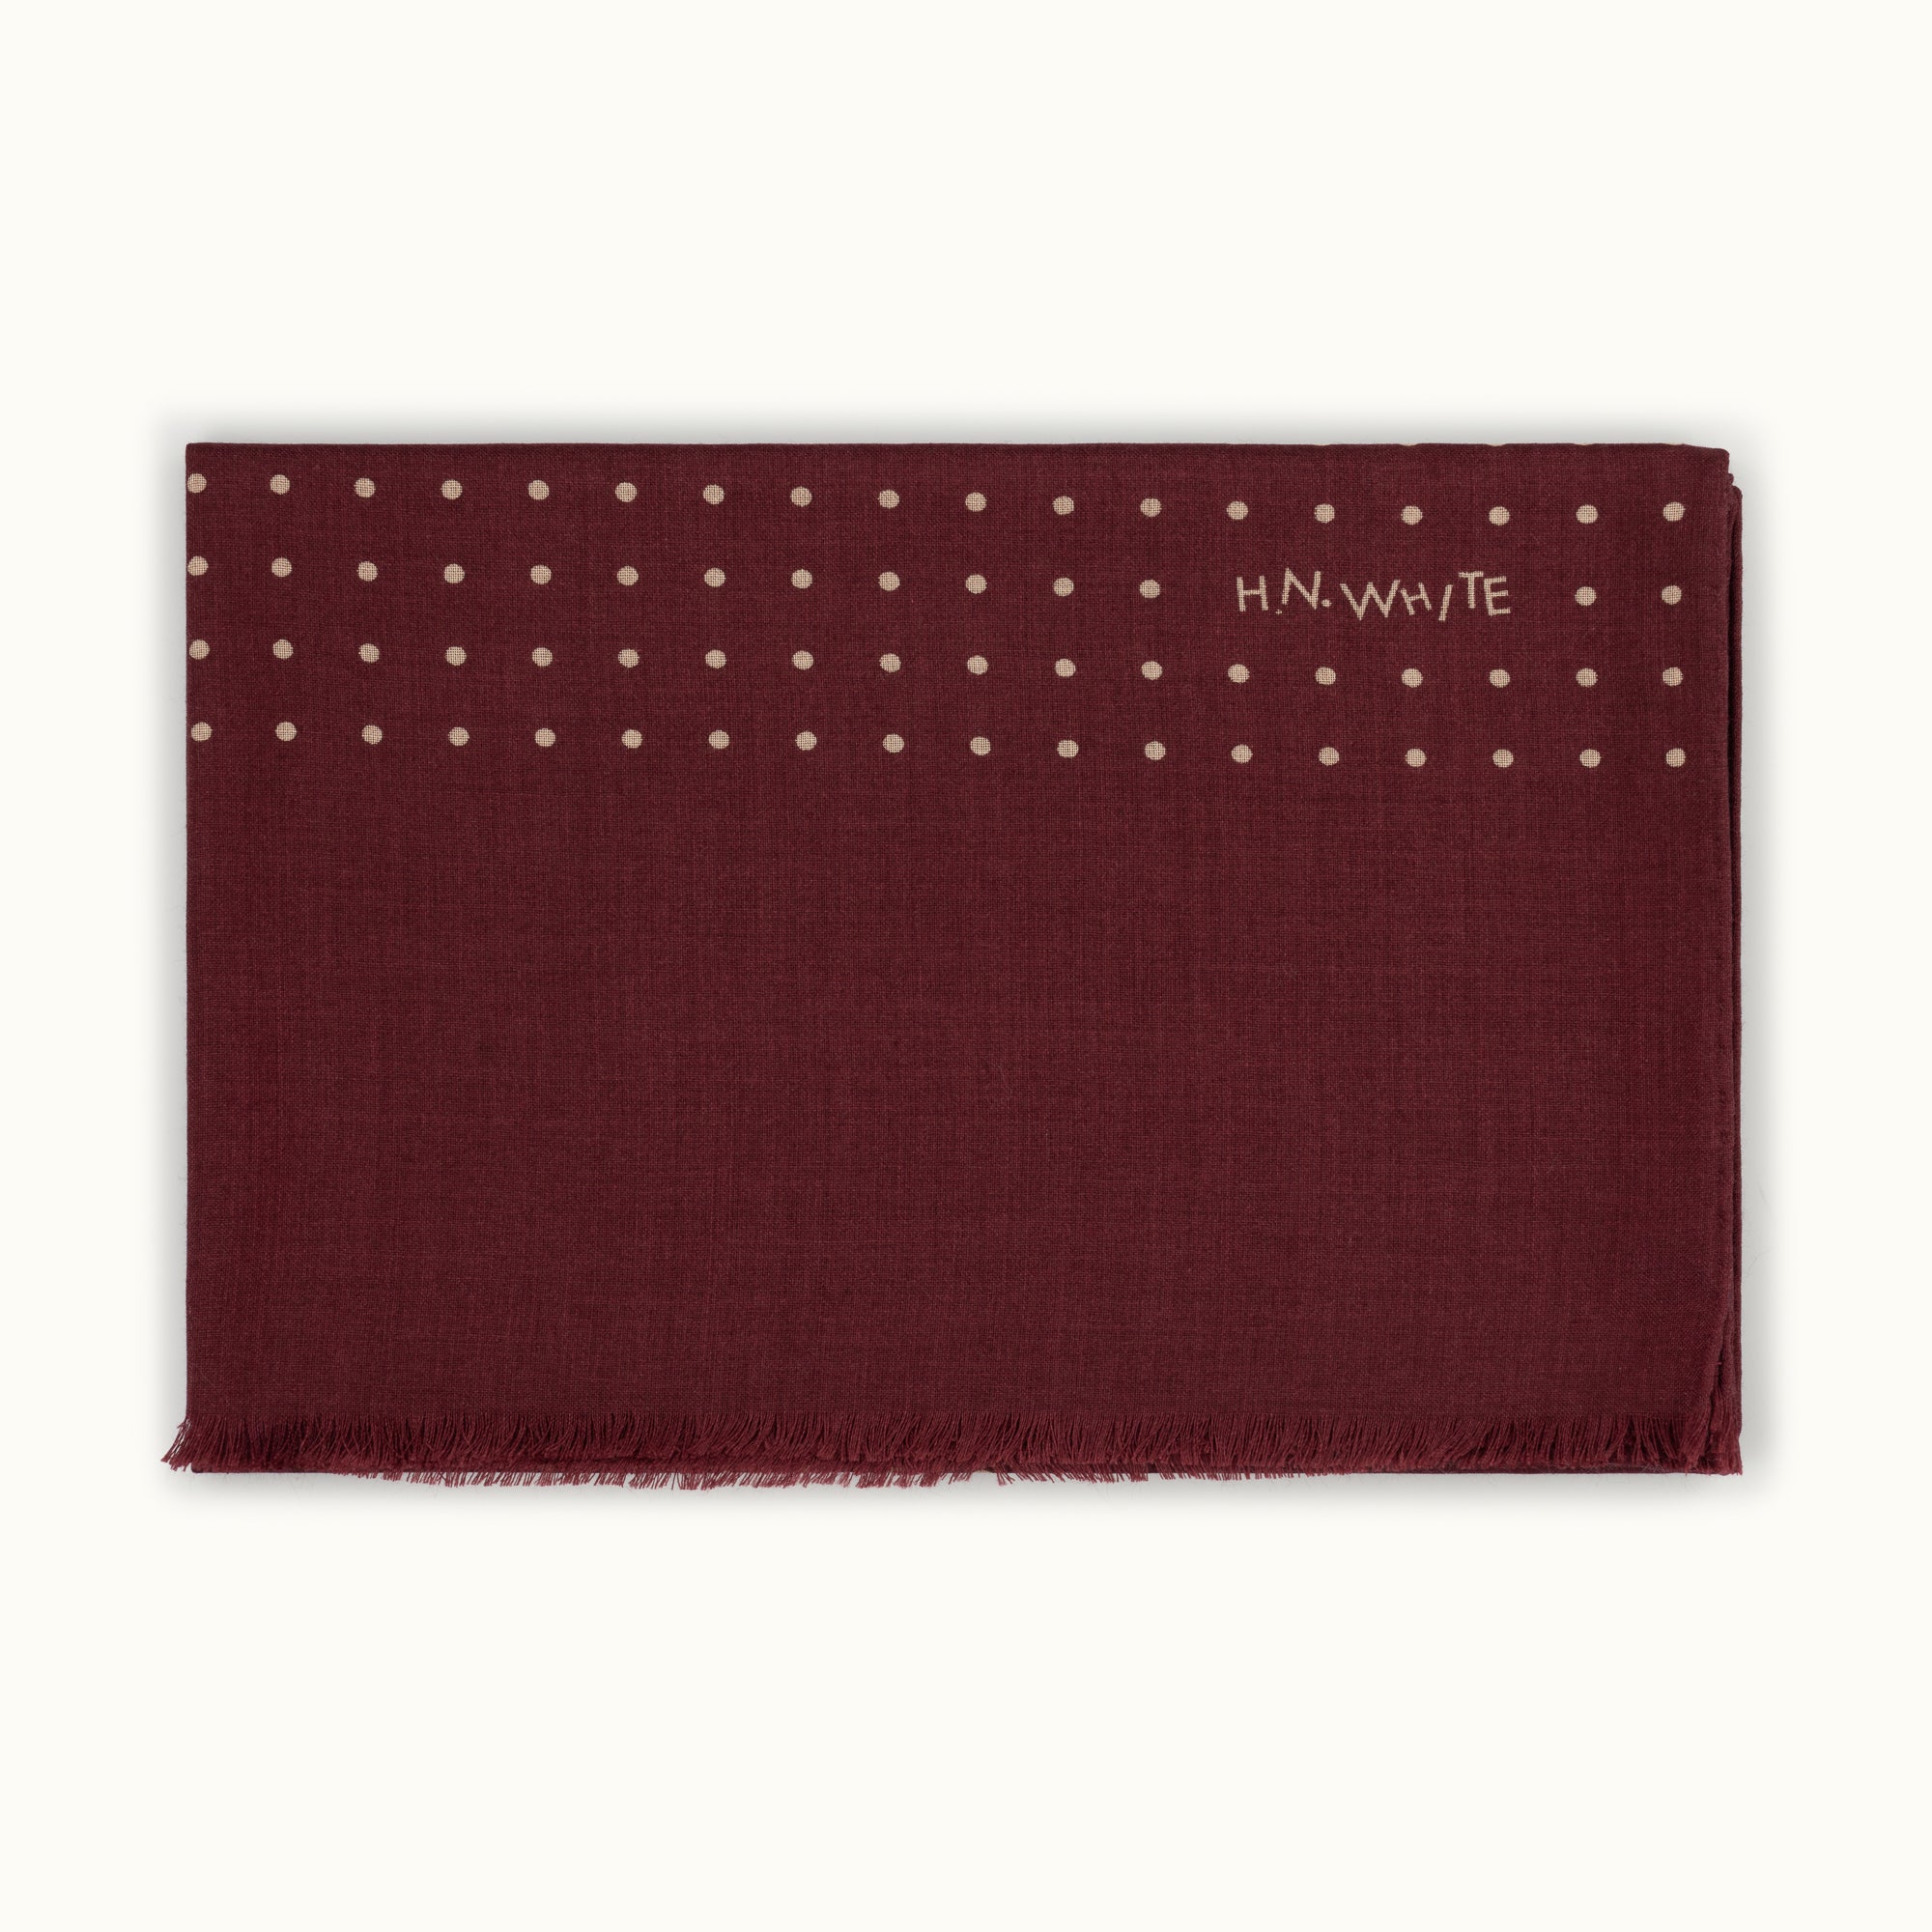 Burgundy Spotted Print Scarf